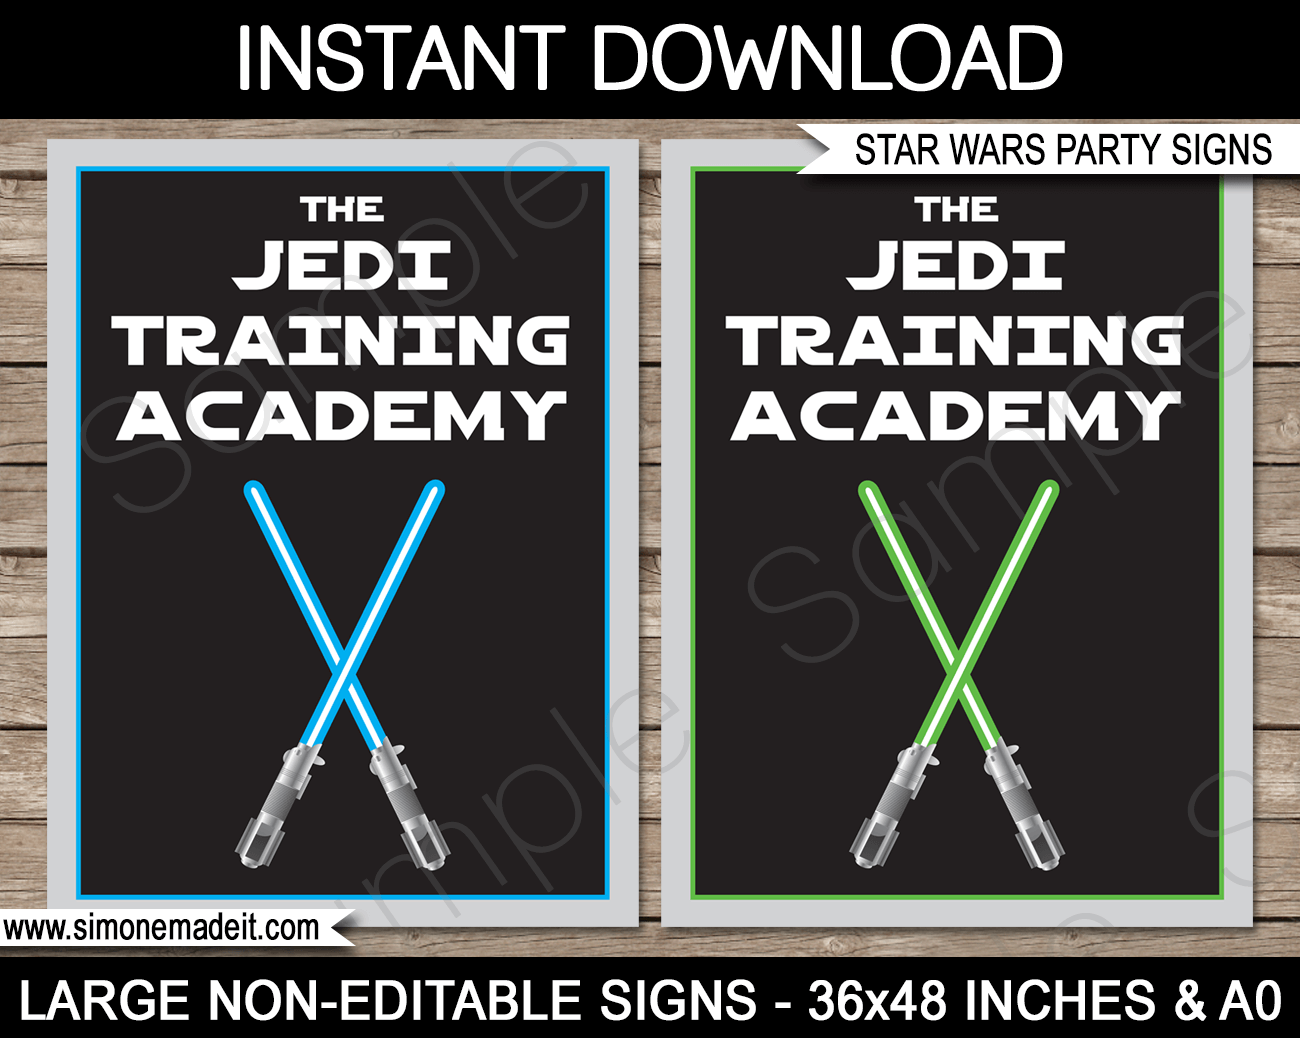 Star Wars Party Backdrop Sign - The Jedi Training Academy | Printable DIY Template | Party Decorations | 36x48 inches | A0 | $4.50 Instant Download via SIMONEmadeit.com